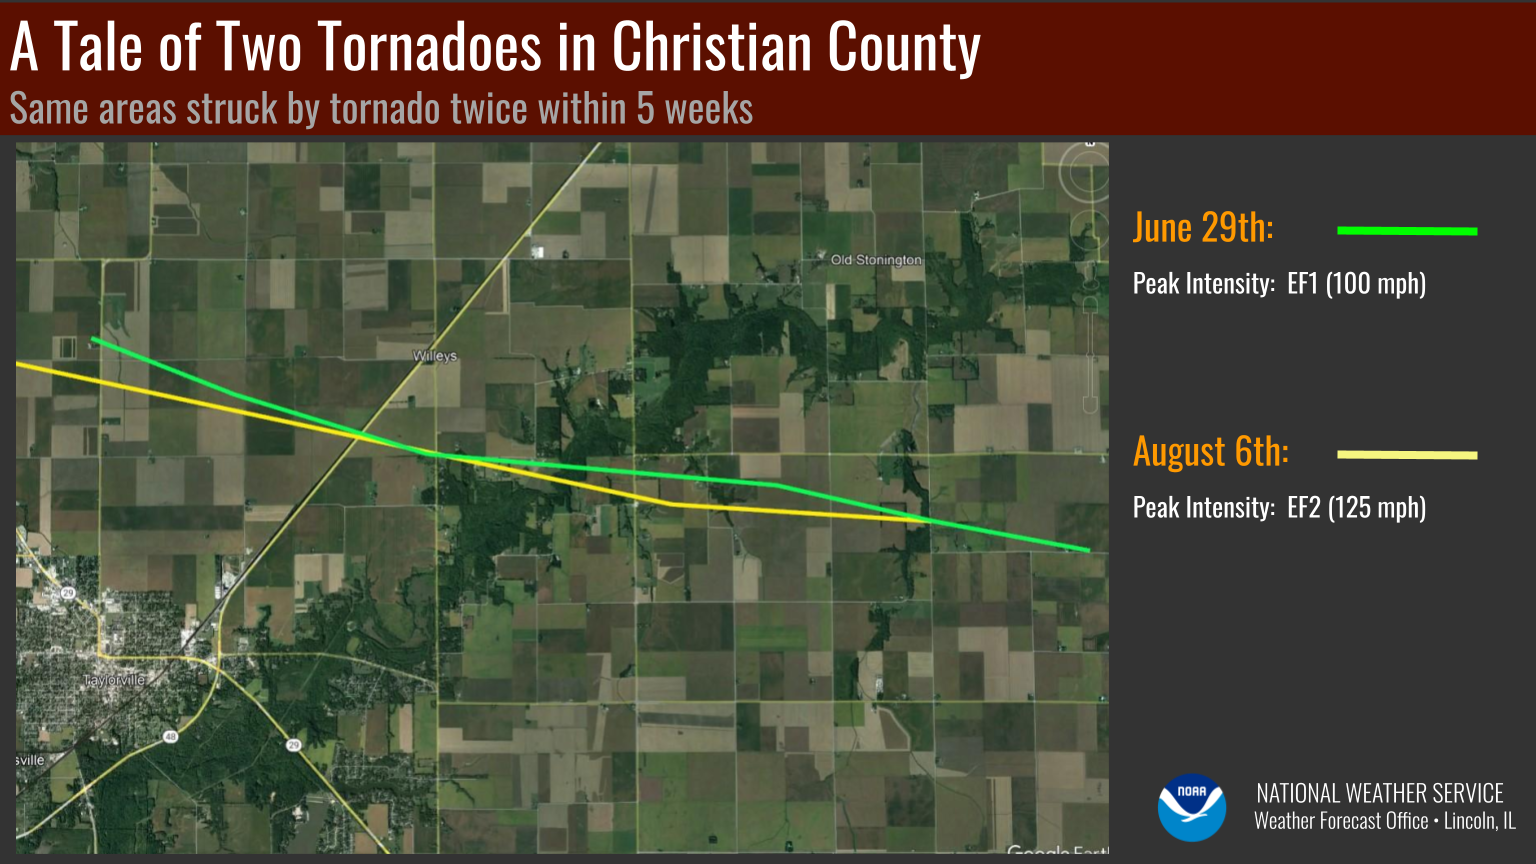 Comparison between June 29th and August 6th tornado tracks northeast of Taylorville